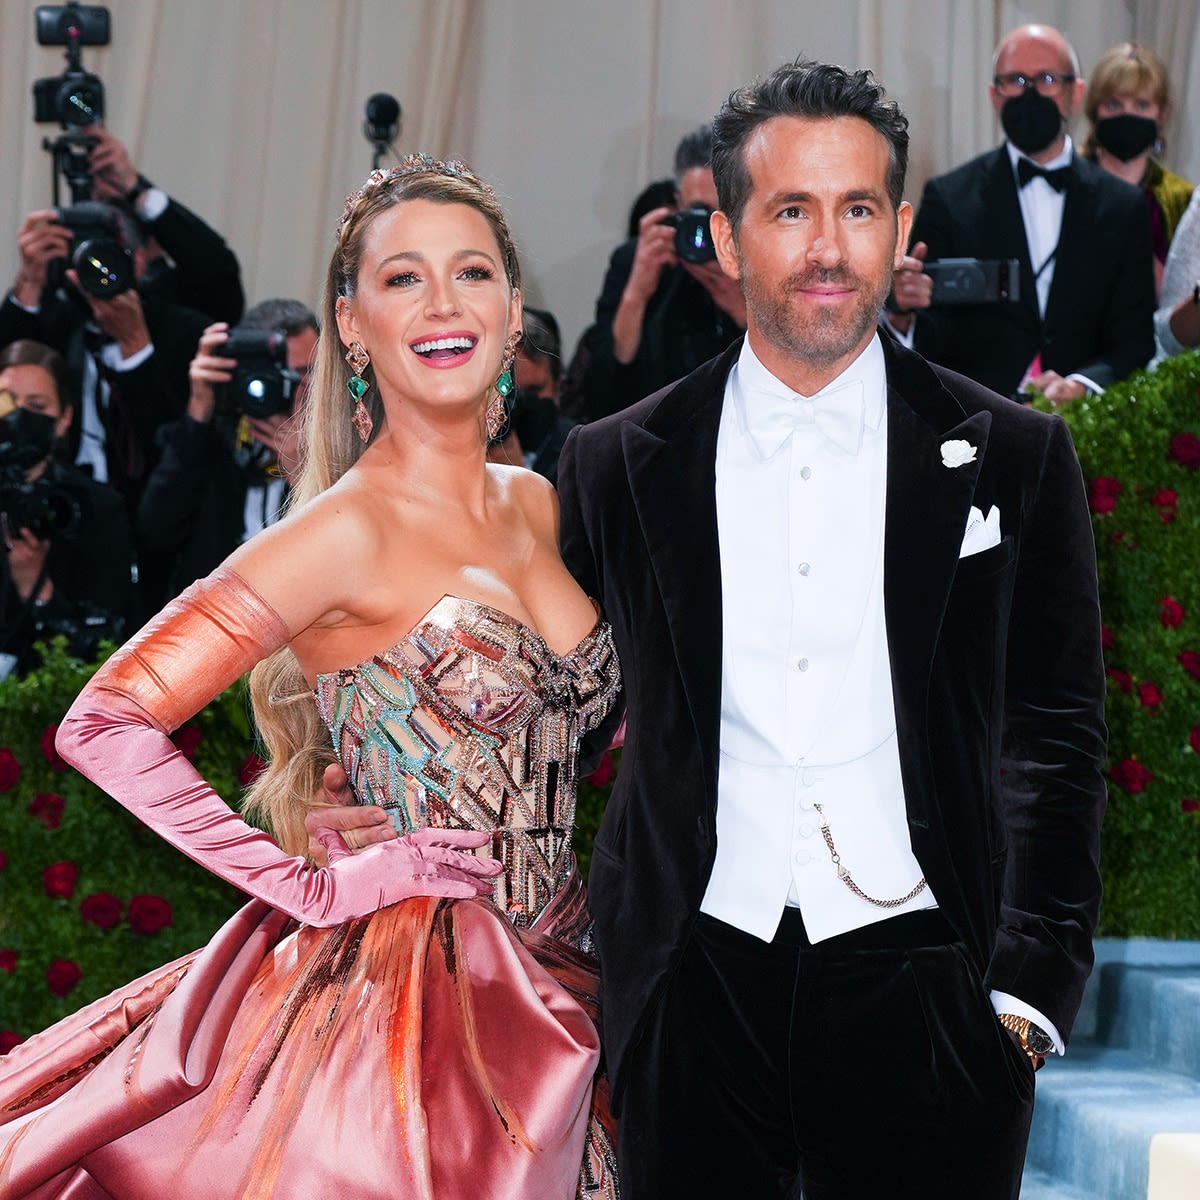 Ryan Reynolds Shares Look at Life With Blake Lively and Their 4 Kids